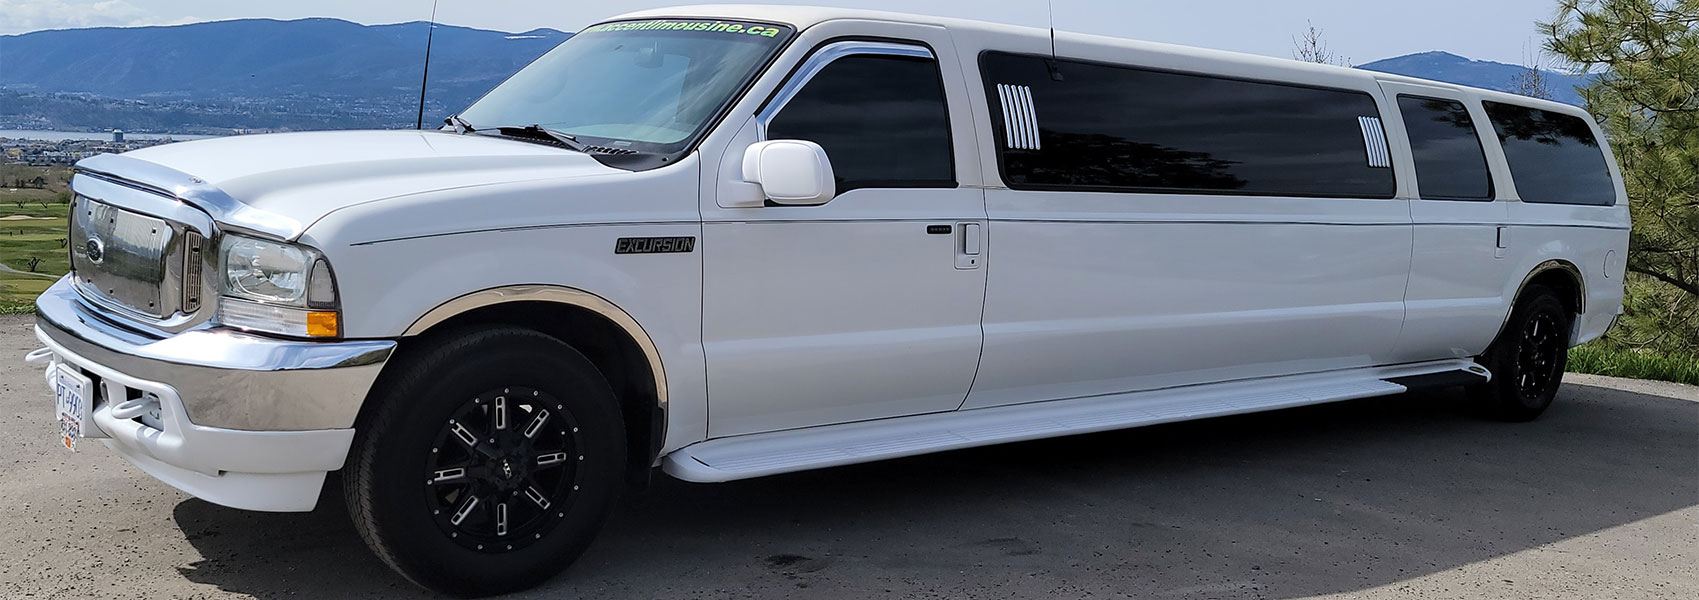 Okanagan Limousine will provide exceptional service at affordable pricing.